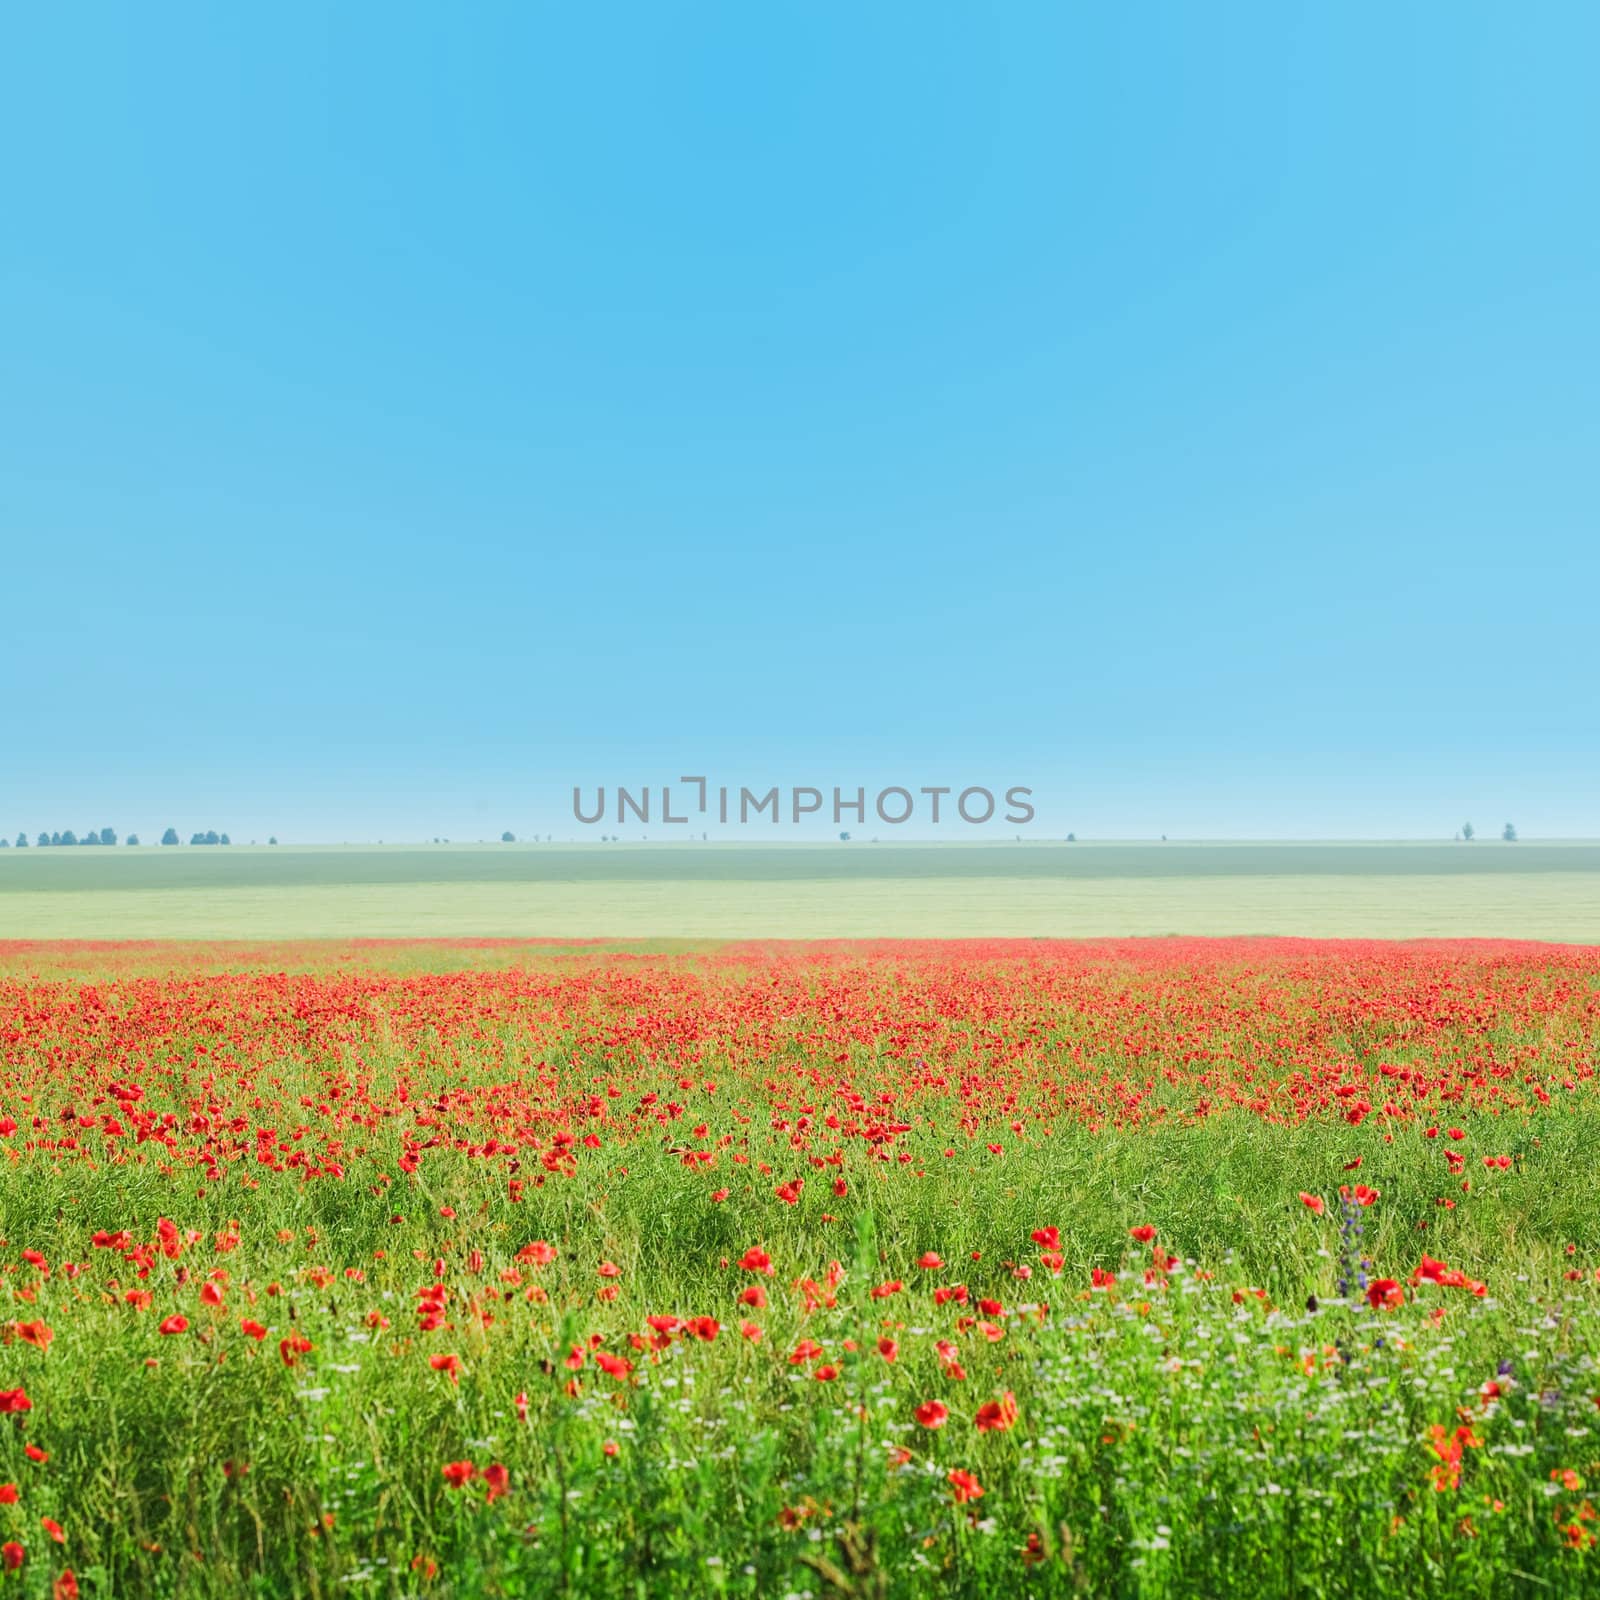 An image of a beautiful field of poppies and blue sky